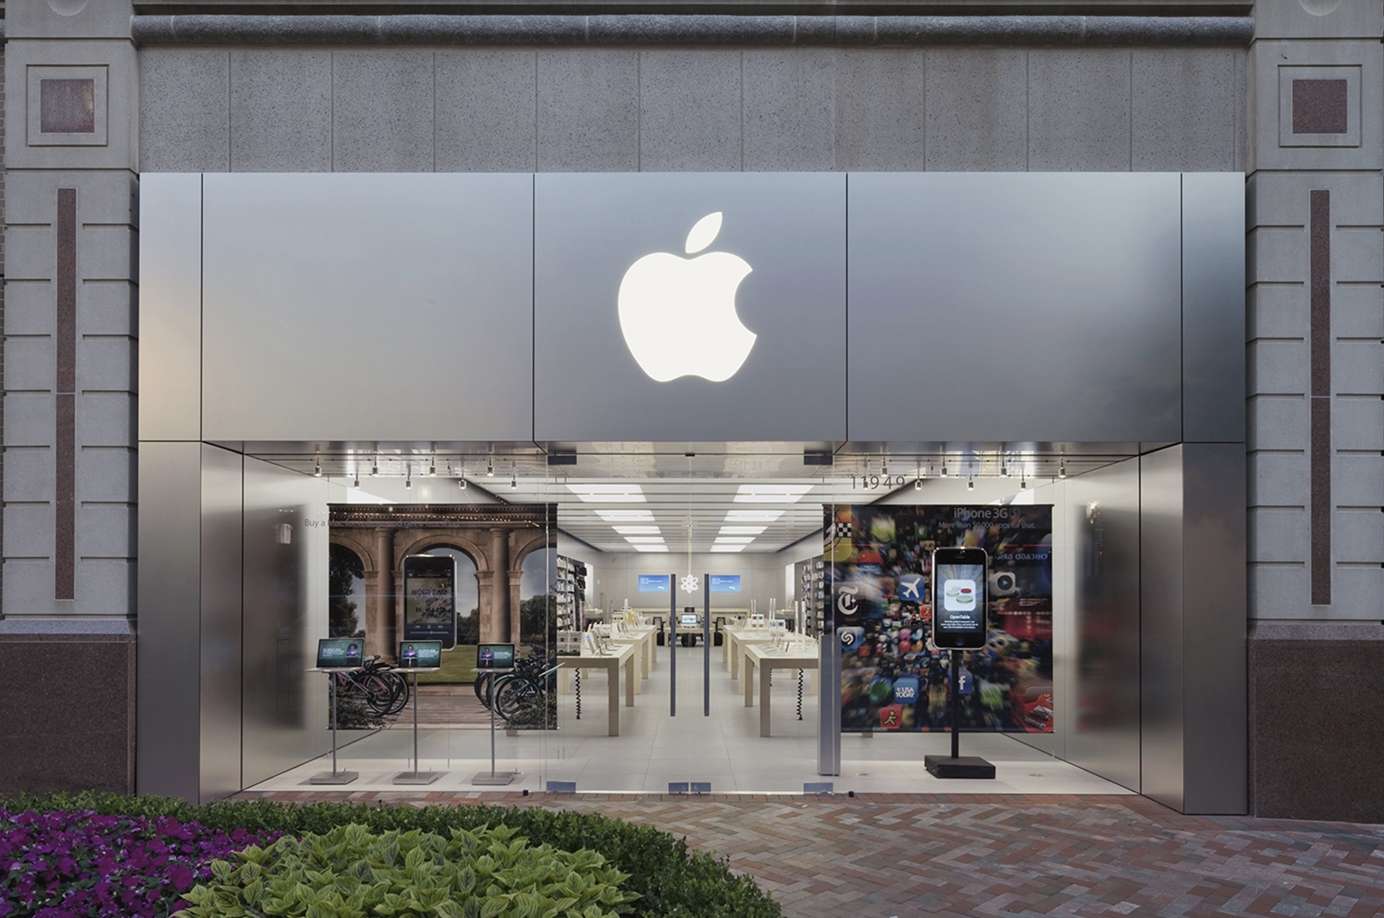 Town Square - Apple Store - Apple